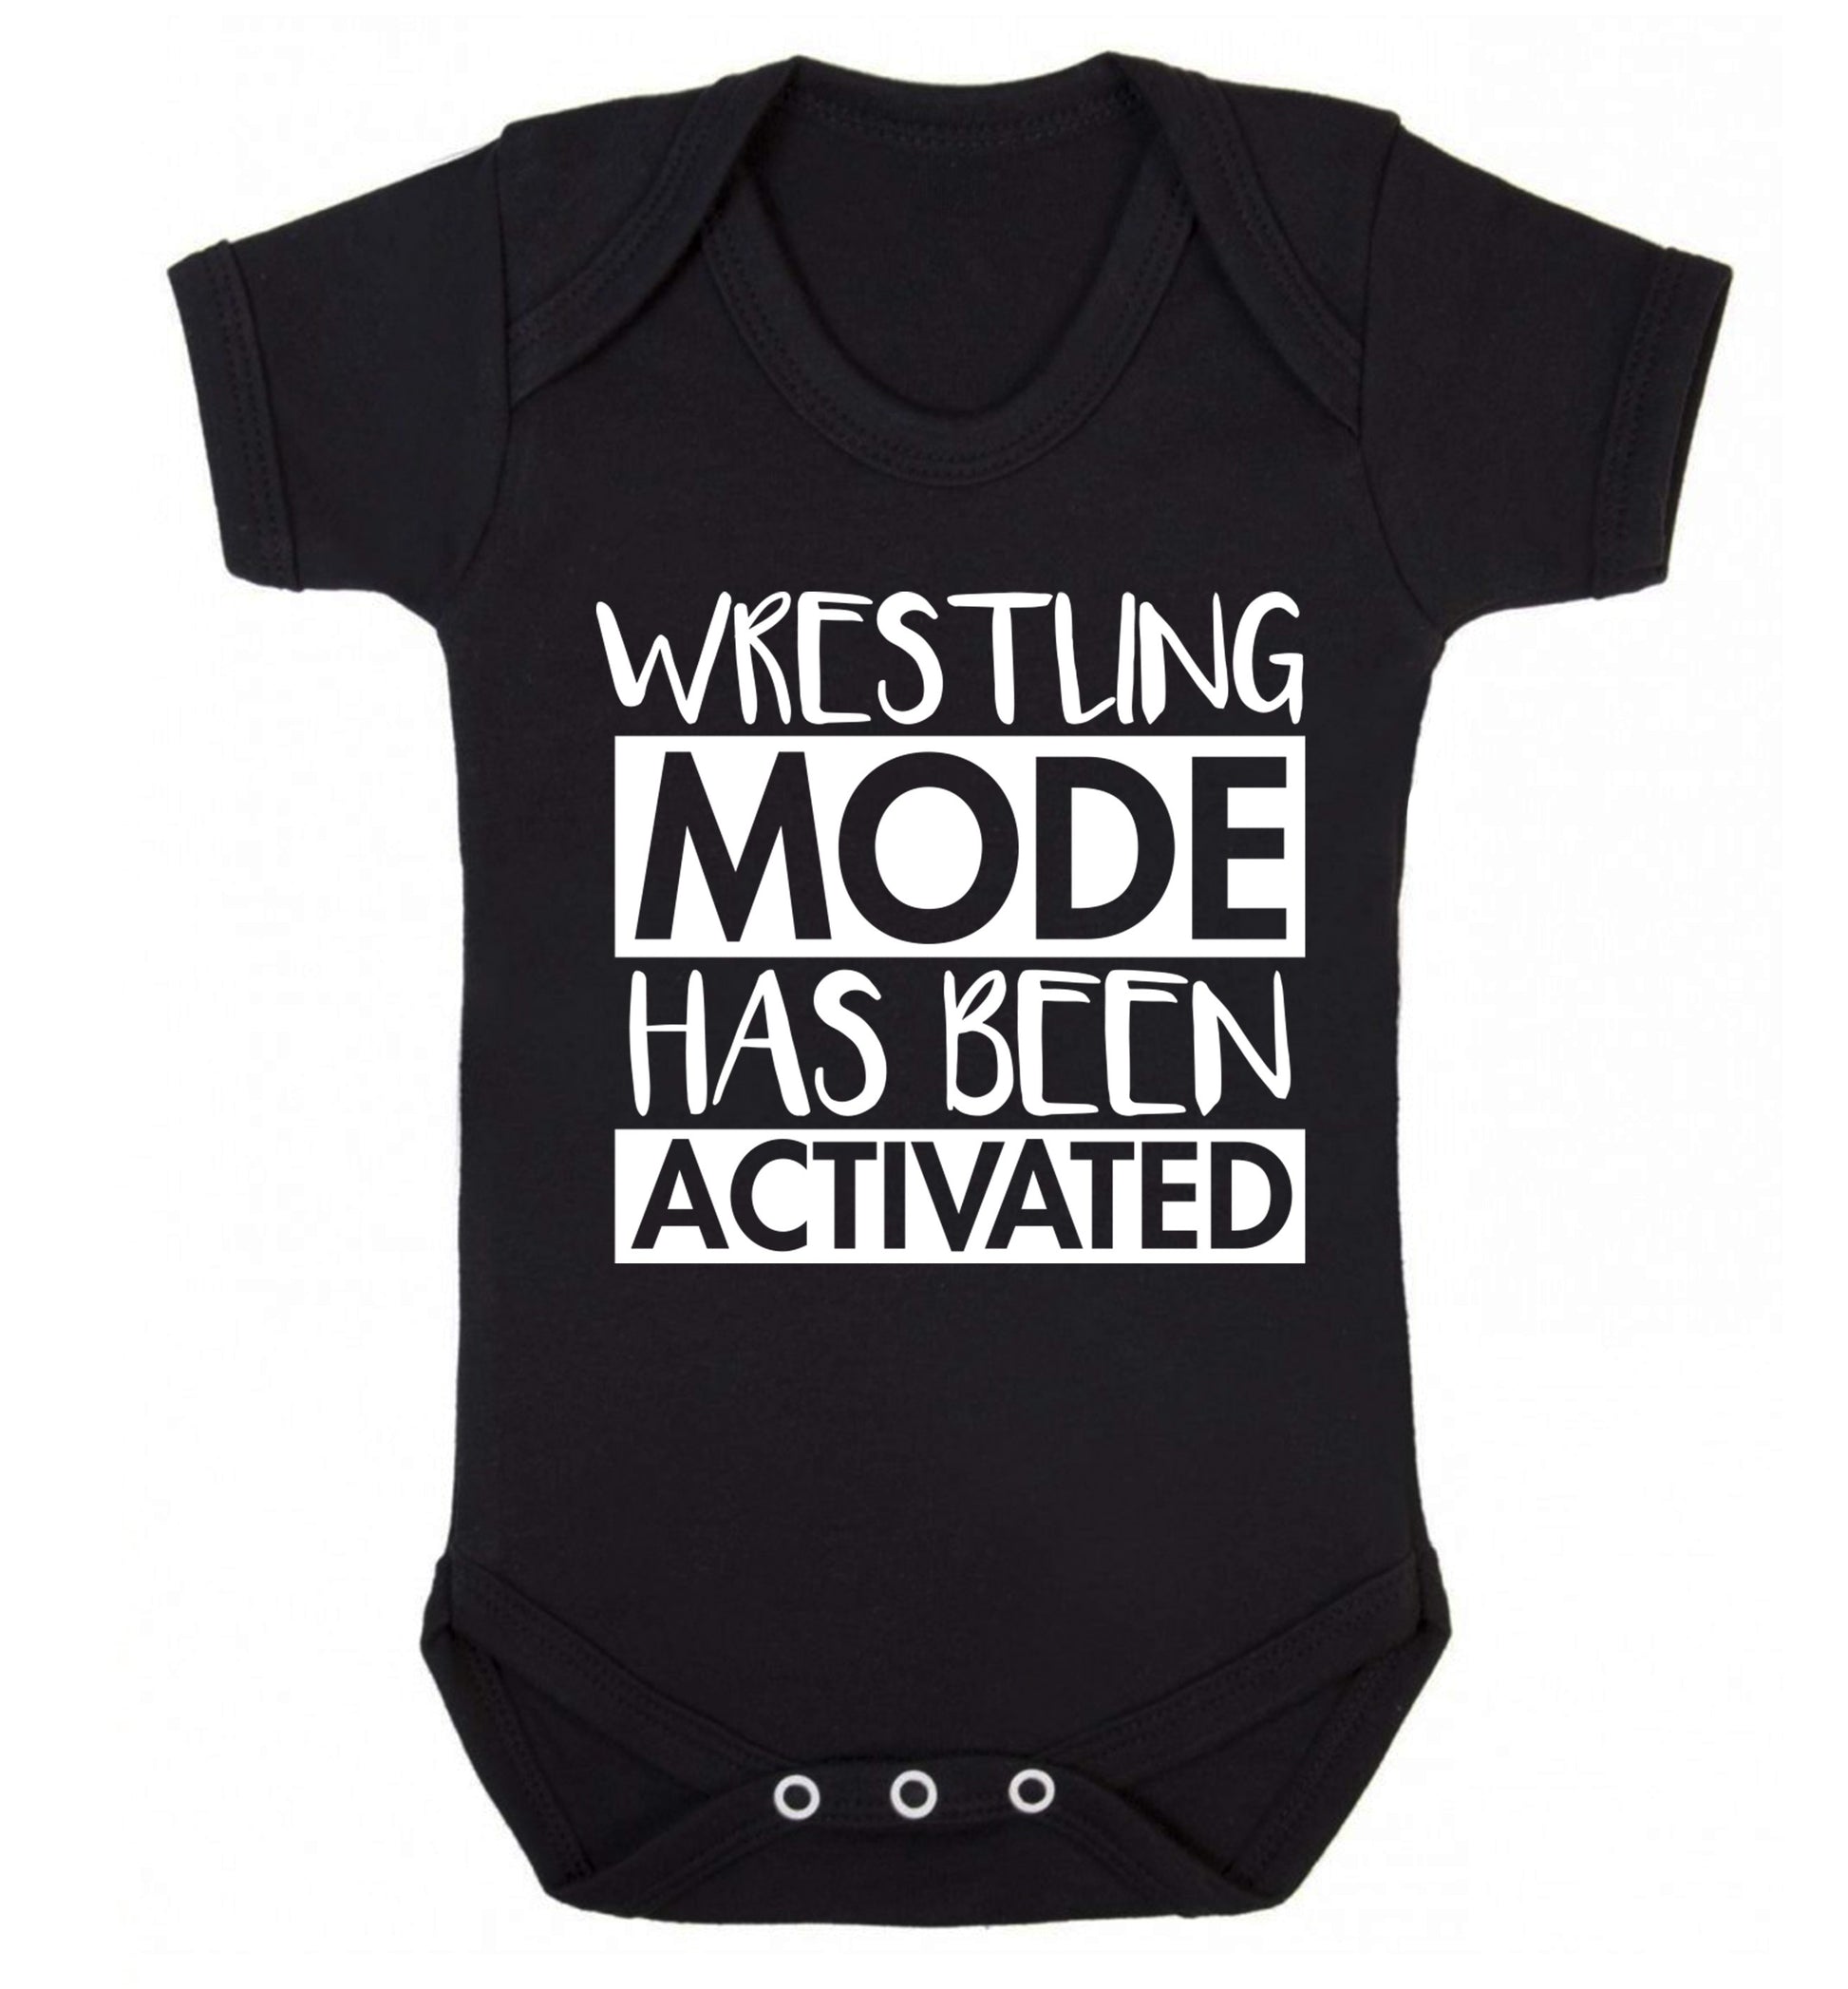 Wresting mode activated Baby Vest black 18-24 months